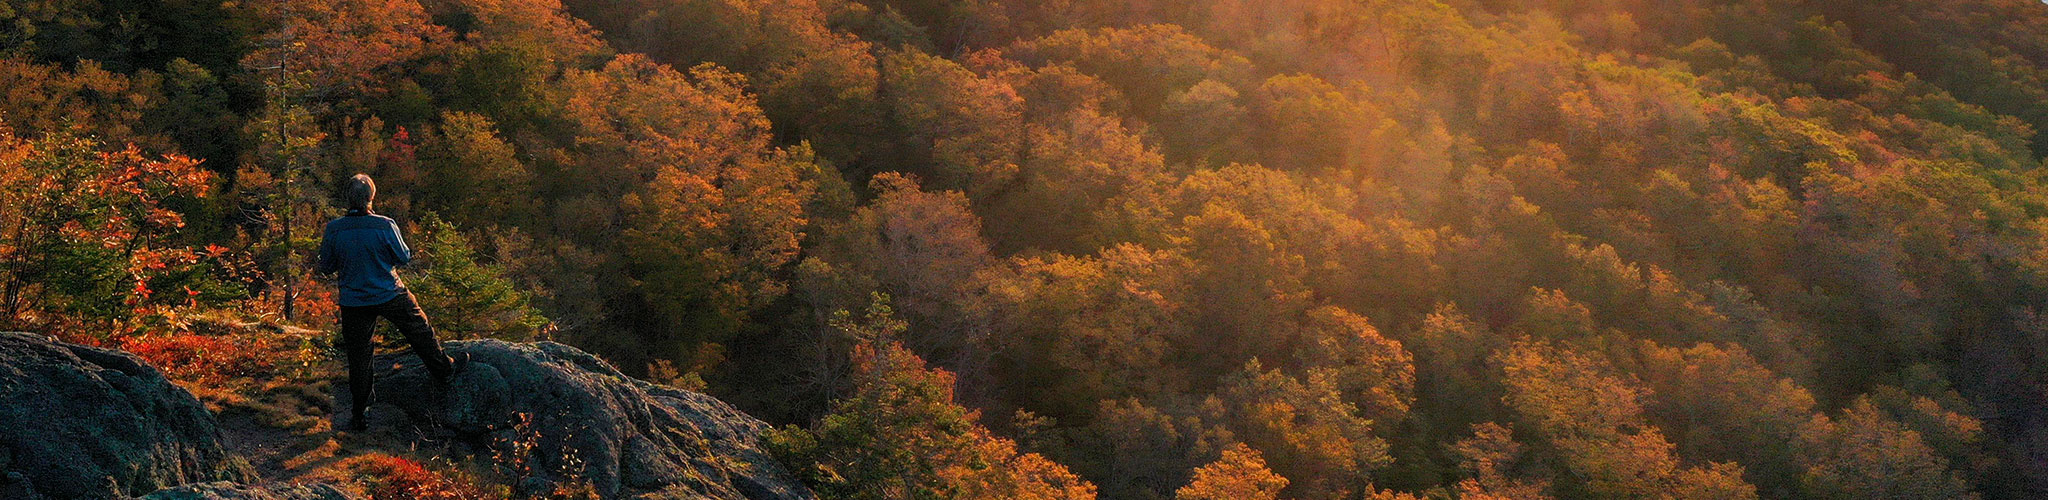 Hiker standing on rock looking down into the fall colored trees in Cape Breton Highlands